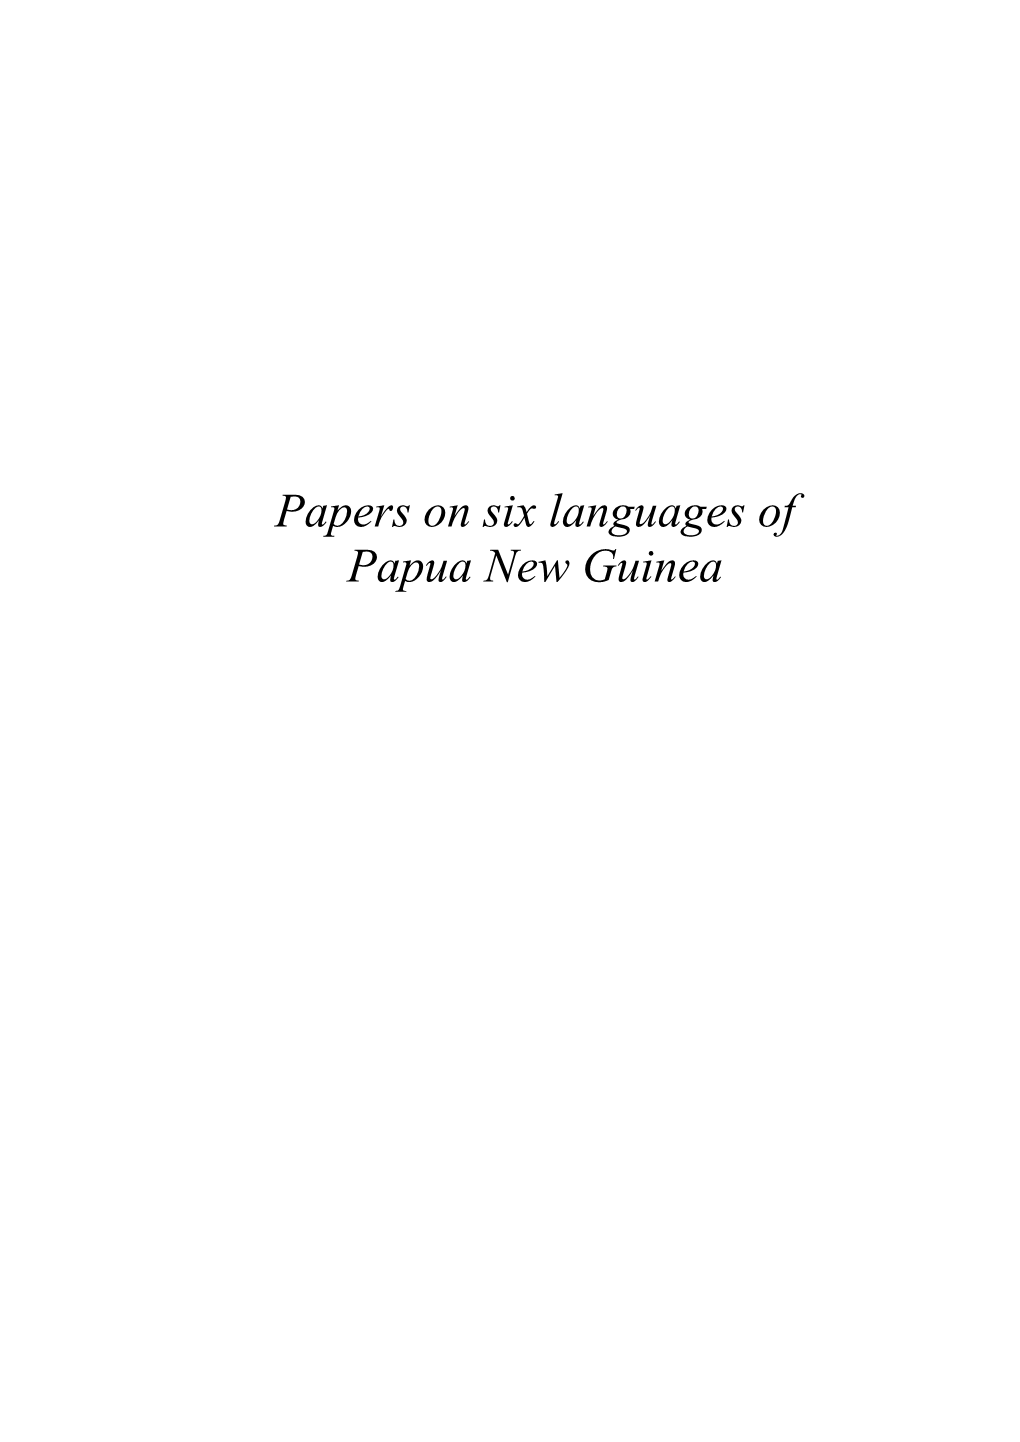 Papers on Six Languages of Papua New Guinea